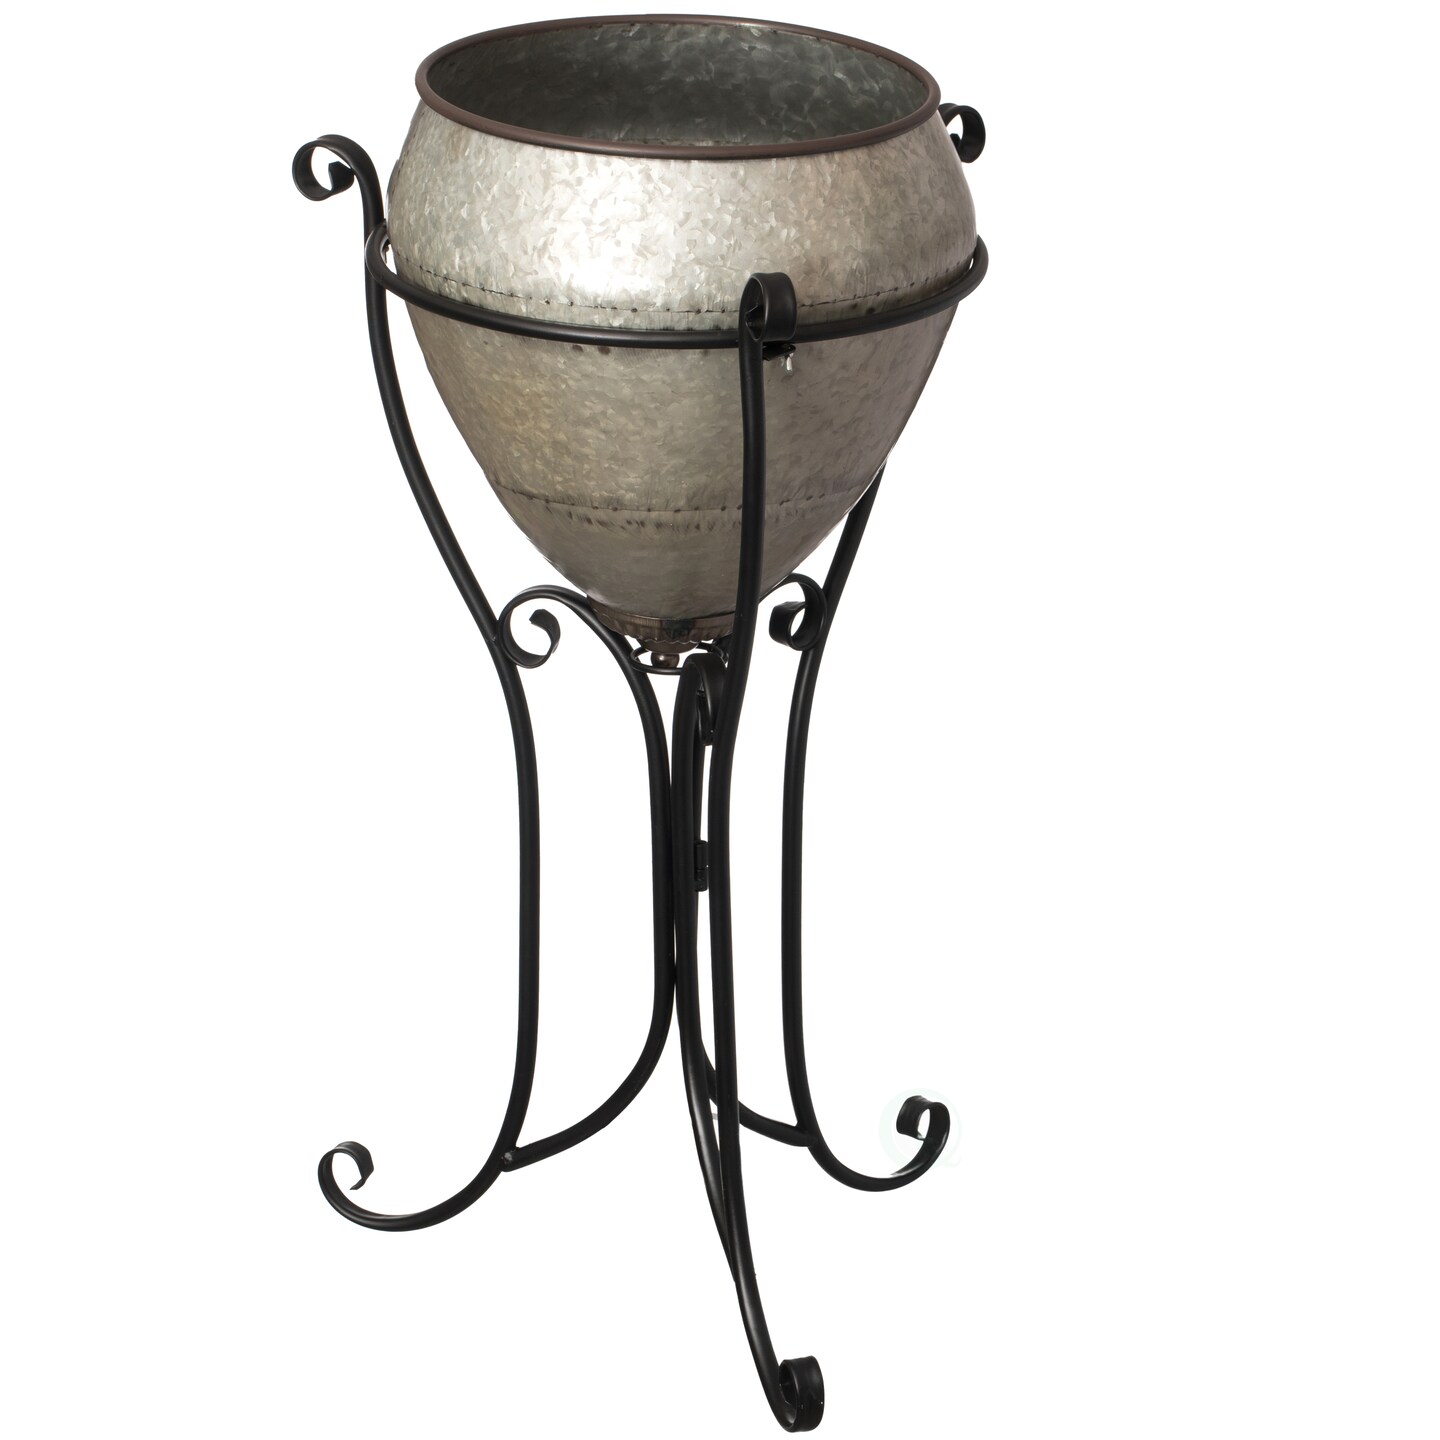 Silver Galvanized Metal Beverage Cooler Tub with Liner and Stand